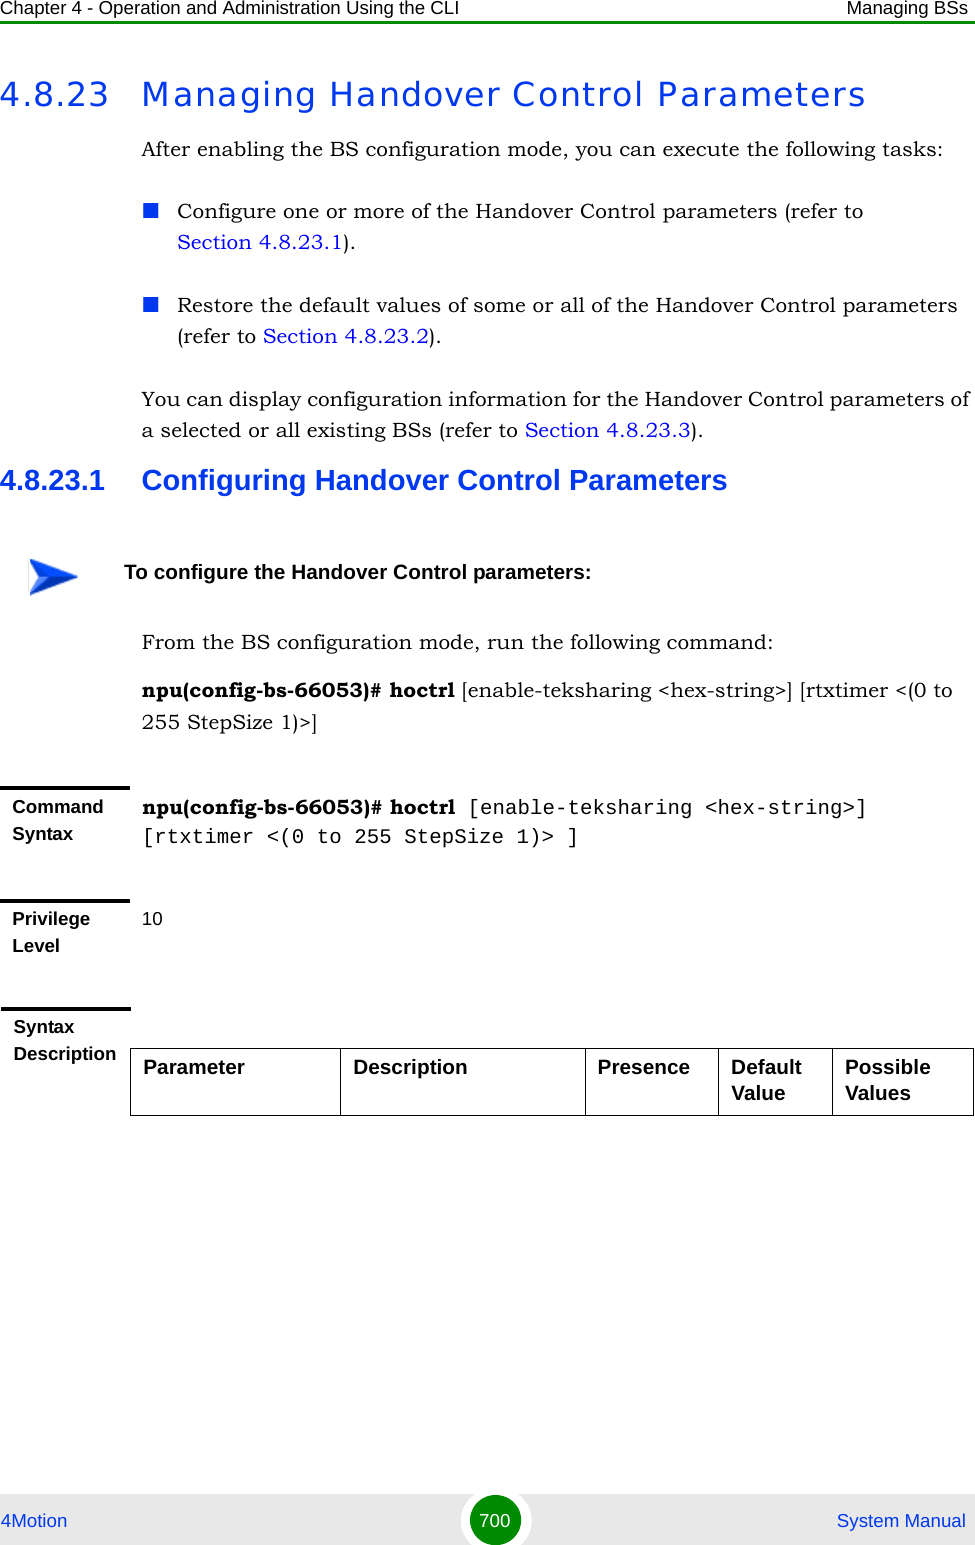 Chapter 4 - Operation and Administration Using the CLI Managing BSs4Motion 700  System Manual4.8.23 Managing Handover Control ParametersAfter enabling the BS configuration mode, you can execute the following tasks:Configure one or more of the Handover Control parameters (refer to Section 4.8.23.1).Restore the default values of some or all of the Handover Control parameters (refer to Section 4.8.23.2).You can display configuration information for the Handover Control parameters of a selected or all existing BSs (refer to Section 4.8.23.3).4.8.23.1 Configuring Handover Control ParametersFrom the BS configuration mode, run the following command:npu(config-bs-66053)# hoctrl [enable-teksharing &lt;hex-string&gt;] [rtxtimer &lt;(0 to 255 StepSize 1)&gt;]To configure the Handover Control parameters:Command Syntaxnpu(config-bs-66053)# hoctrl [enable-teksharing &lt;hex-string&gt;] [rtxtimer &lt;(0 to 255 StepSize 1)&gt; ]Privilege Level10Syntax Description Parameter Description Presence Default Value Possible Values